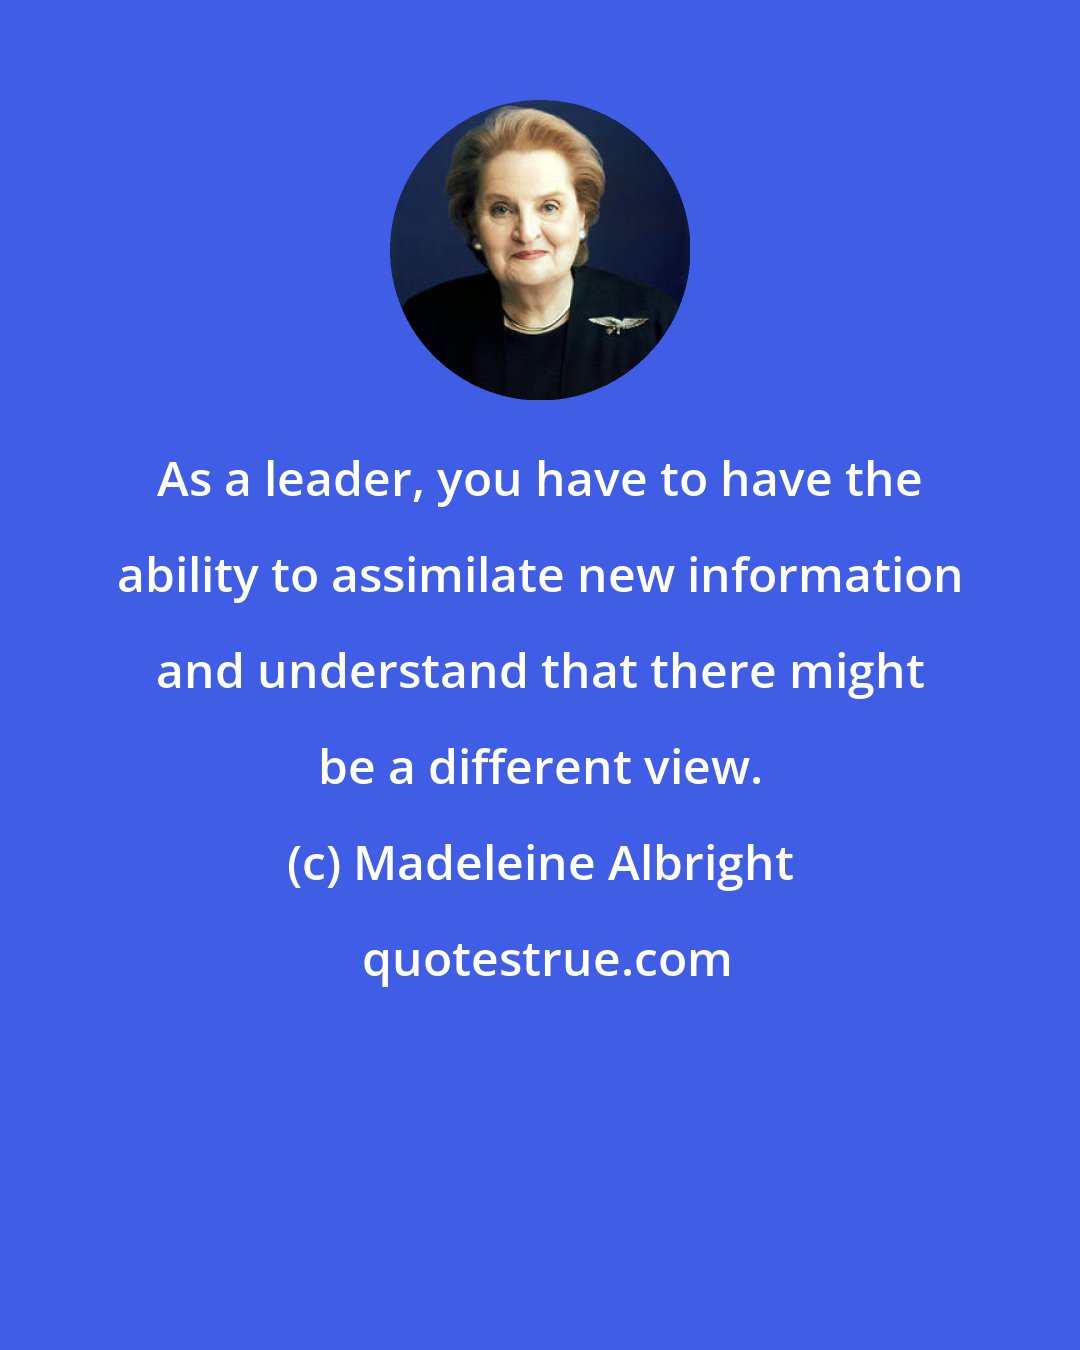 Madeleine Albright: As a leader, you have to have the ability to assimilate new information and understand that there might be a different view.